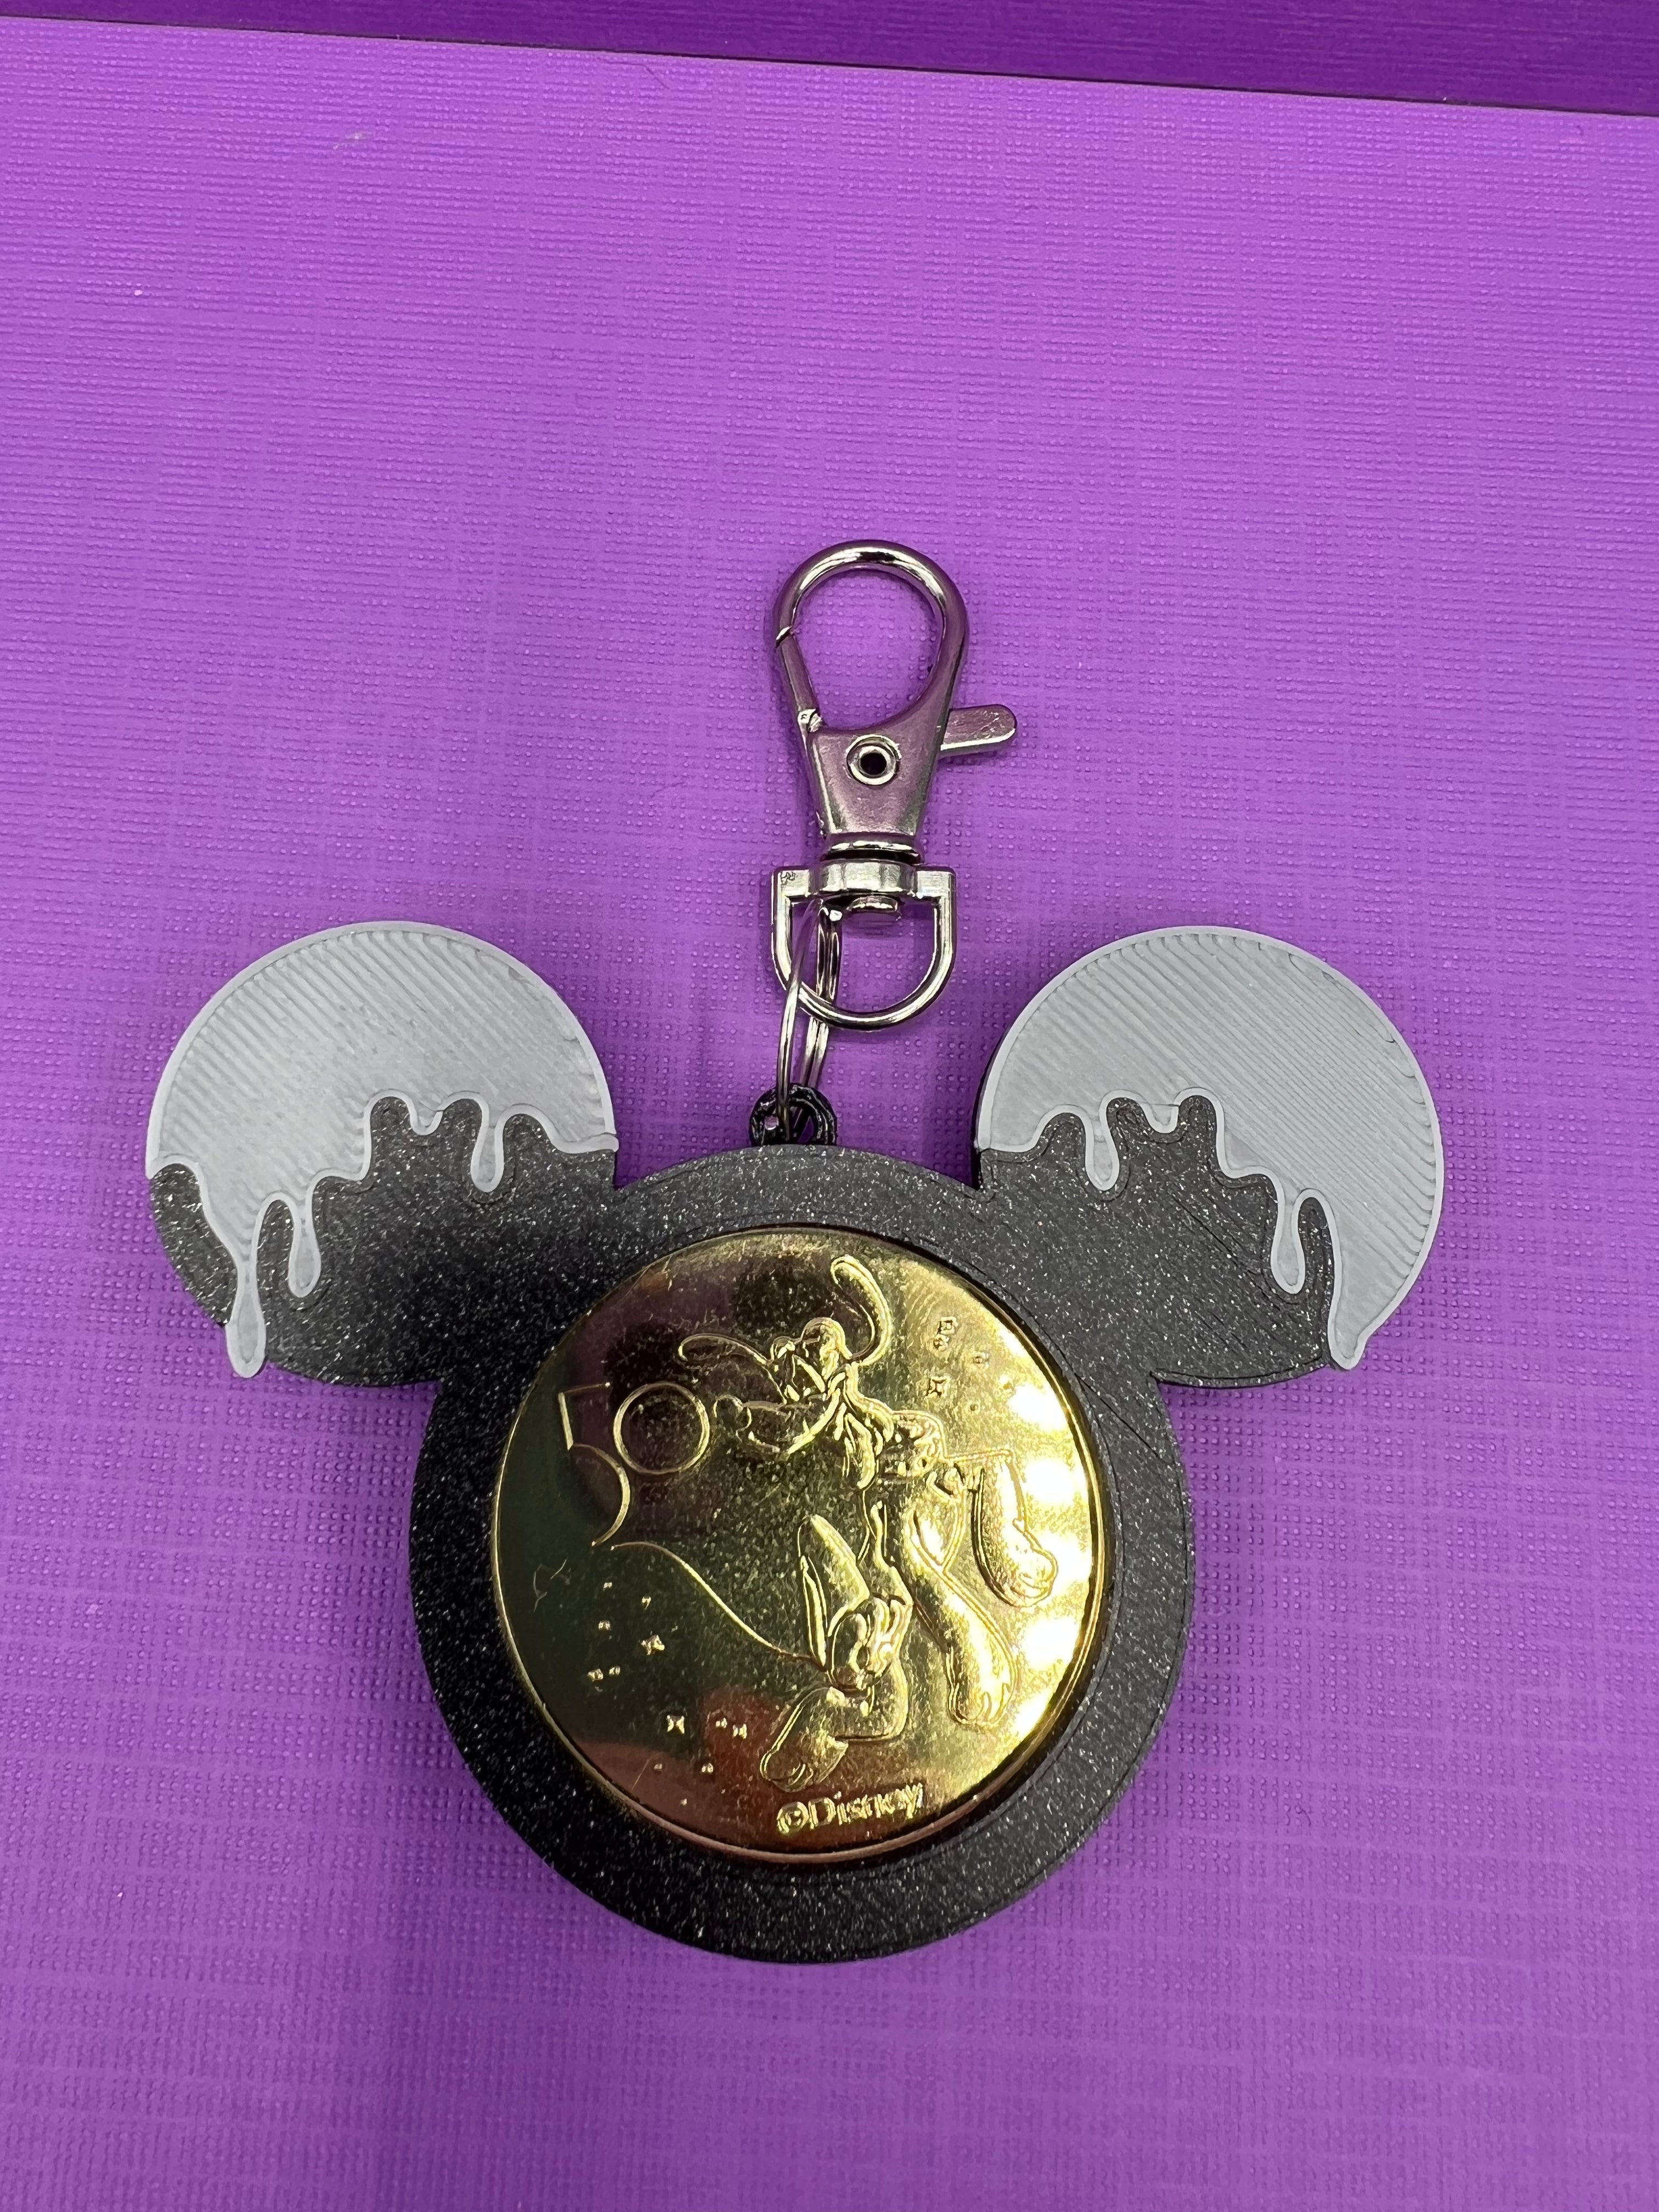 Drippy Mouse Collectable Coin Holder Keychain